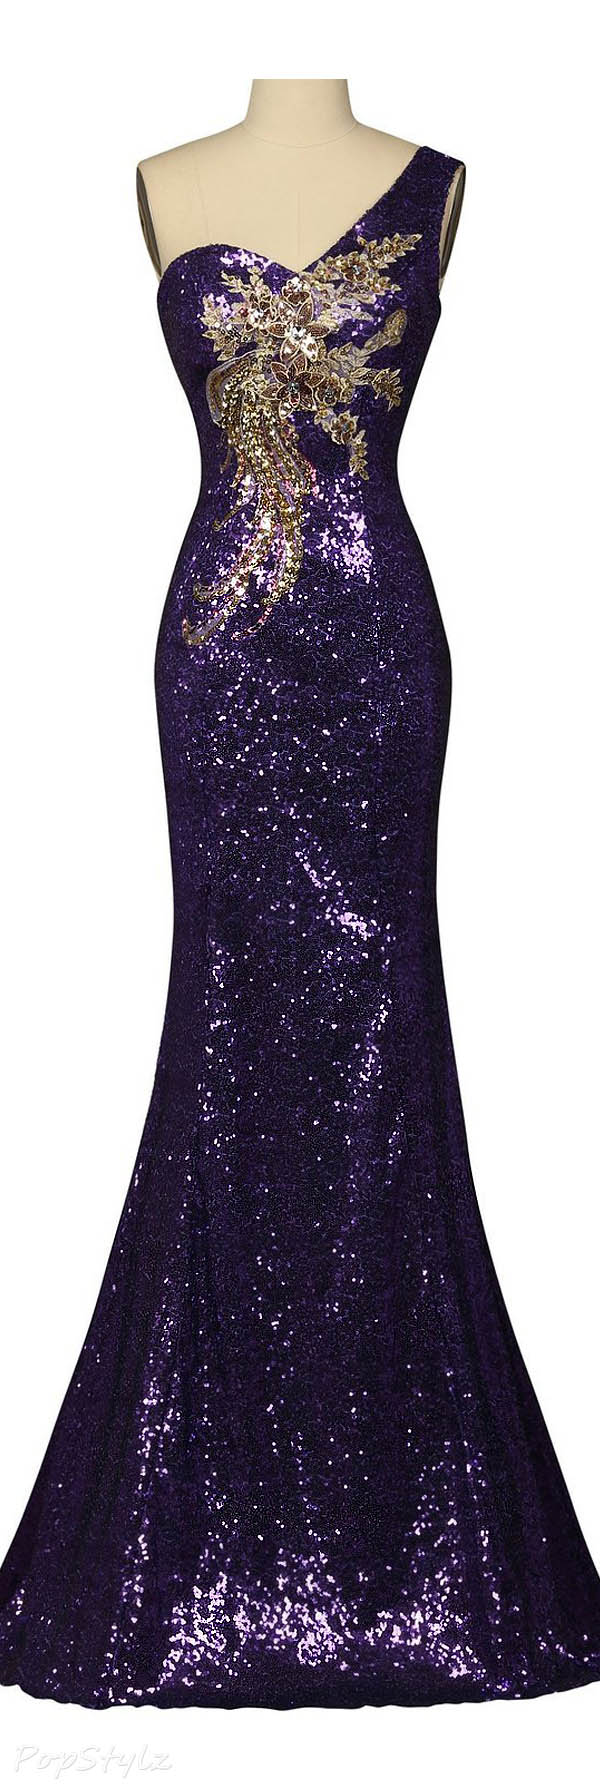 Sunvary One Shoulder Mermaid Sequin Paillette Evening Gown